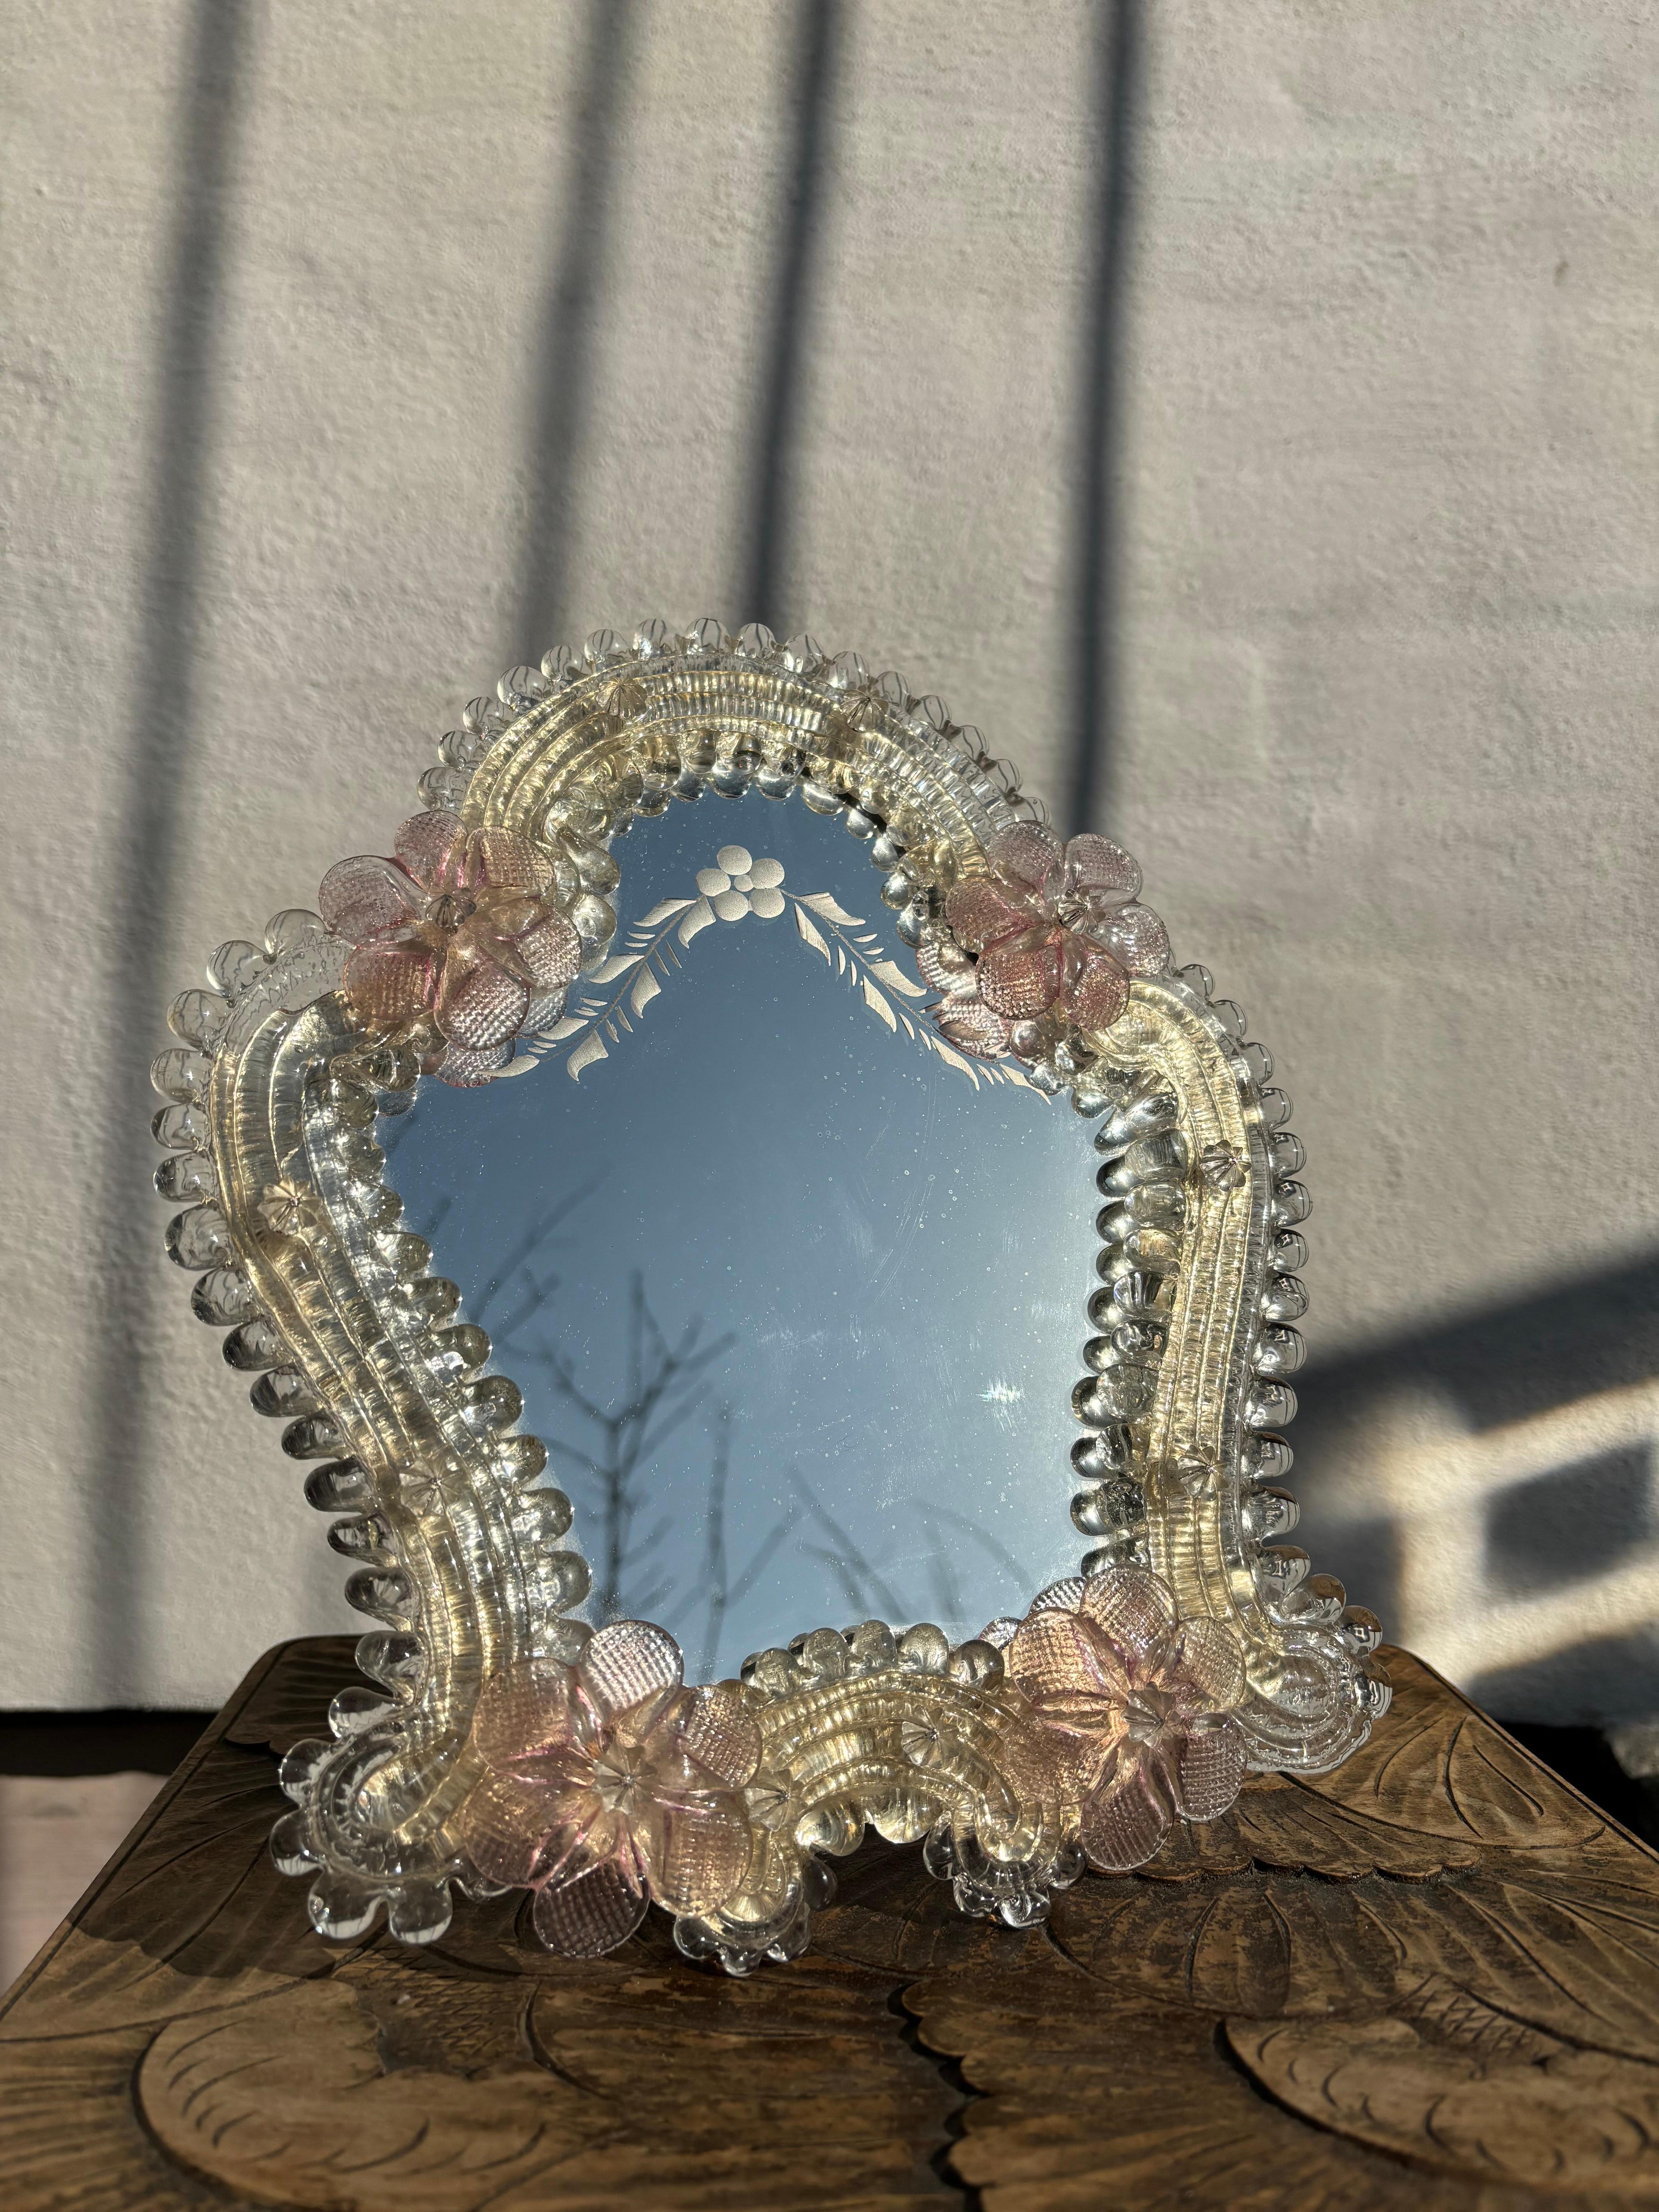 Vintage Venetian Murano glass dressing table / vanity wall mirror with floral etchings on the glass and a stunning art glass frame with clear and soft rose flower decorations. Mounted on wooden back with hinged table rest and metal easel for wall